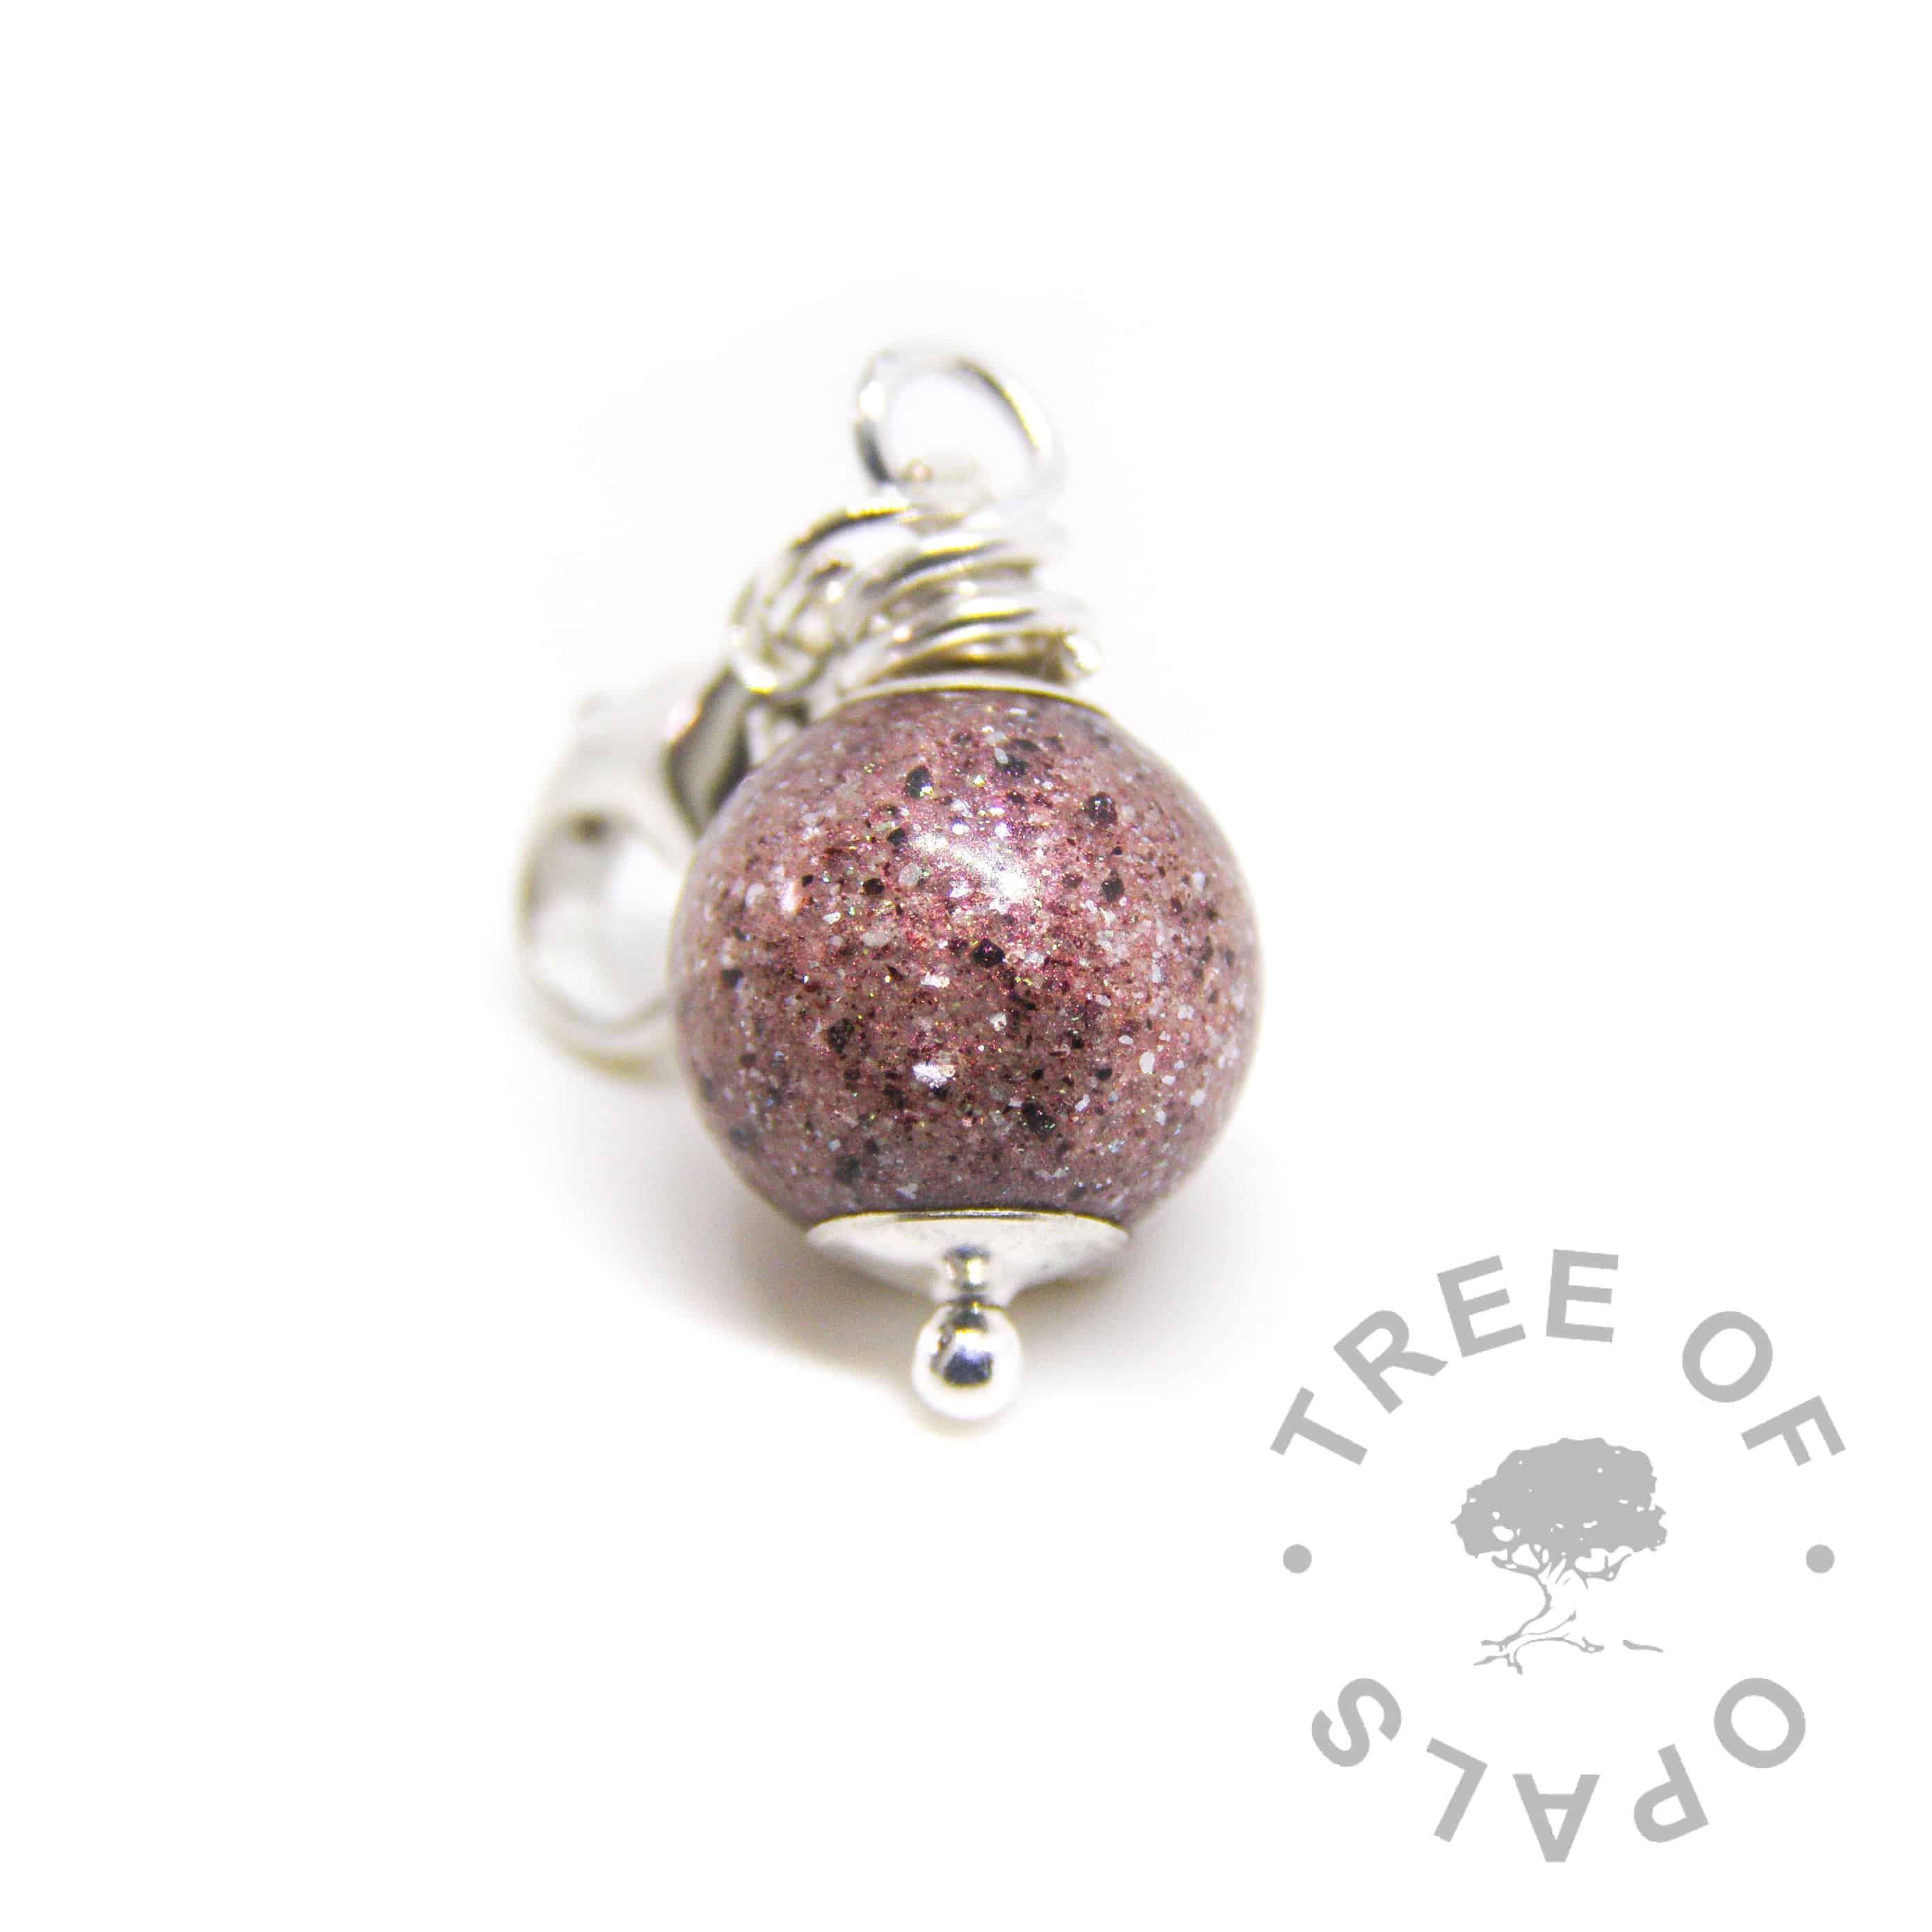 placenta dangle charm with diamond powder April birthstone, unicorn white sparkle mix and red pearlescent powder, dangle charm for Thomas Sabo style bracelets, handmade by Tree of Opals